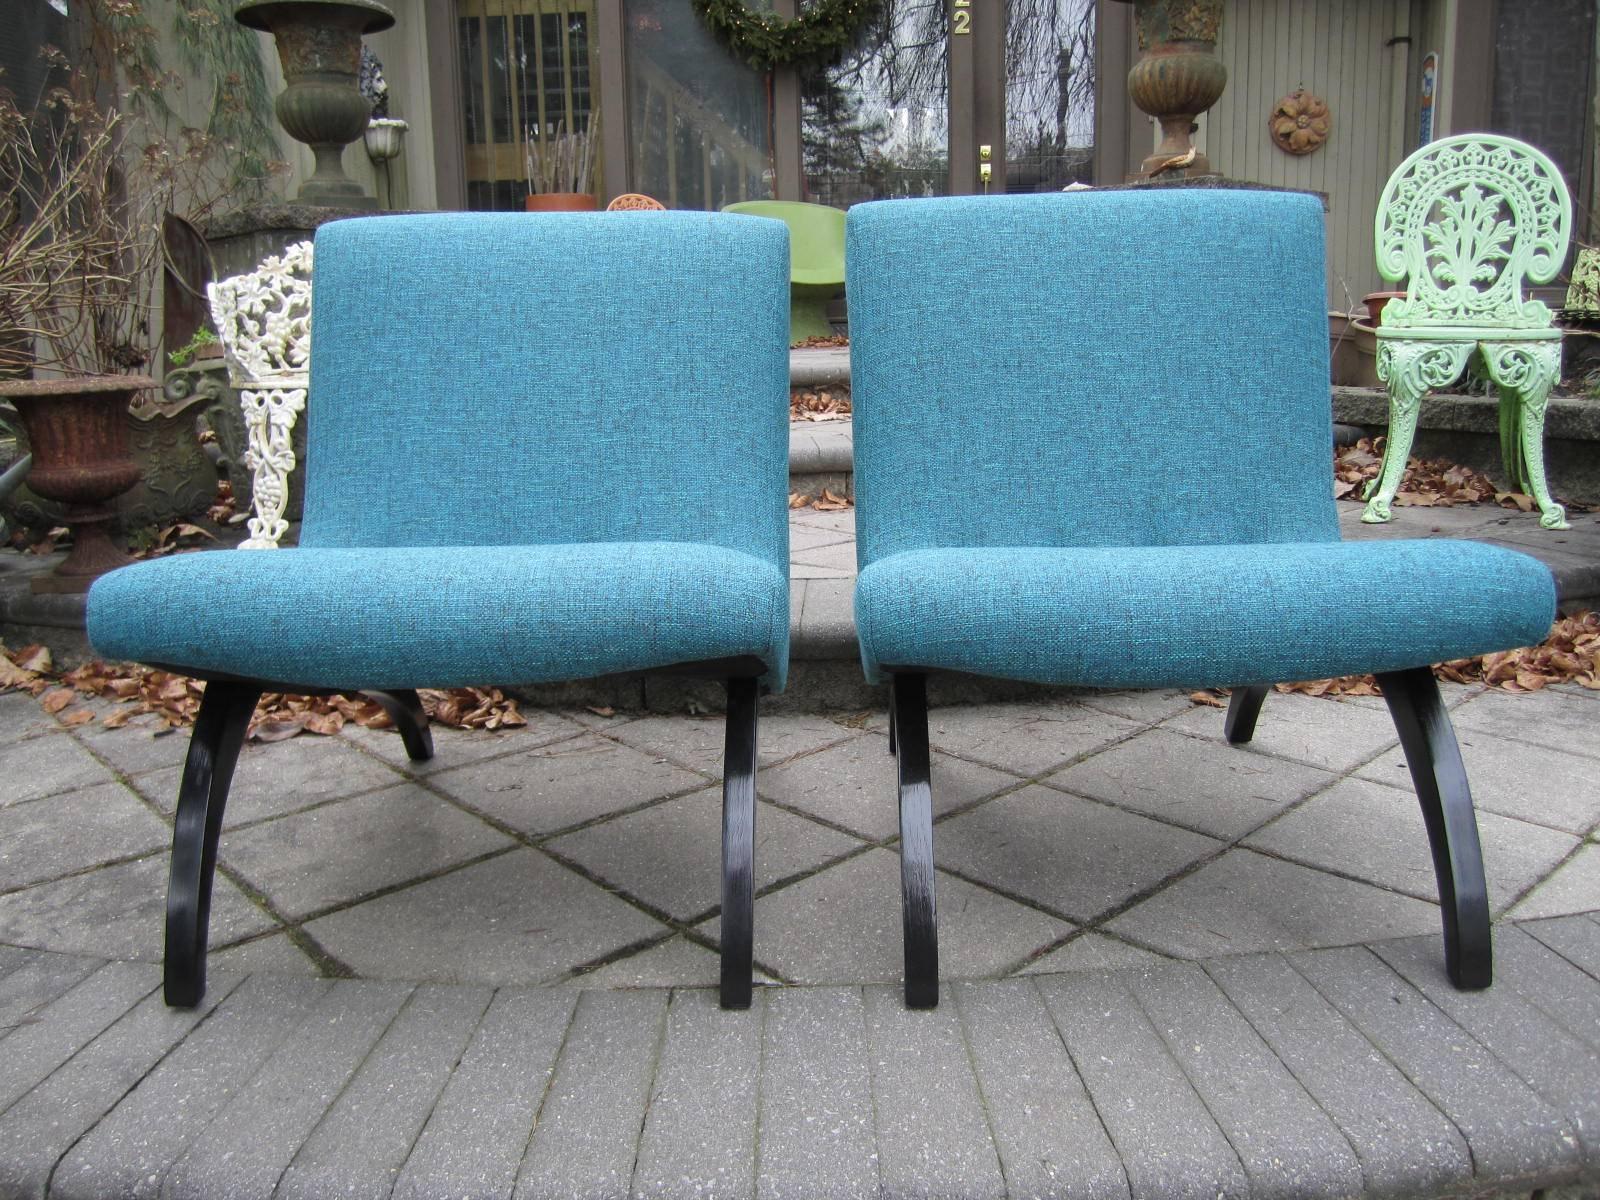 Pair of scoop chairs in the style of Milo Baughman. Legs newly re-lacquered in black with newly upholstered seats in gorgeous woven turquoise fabric color called Pool.